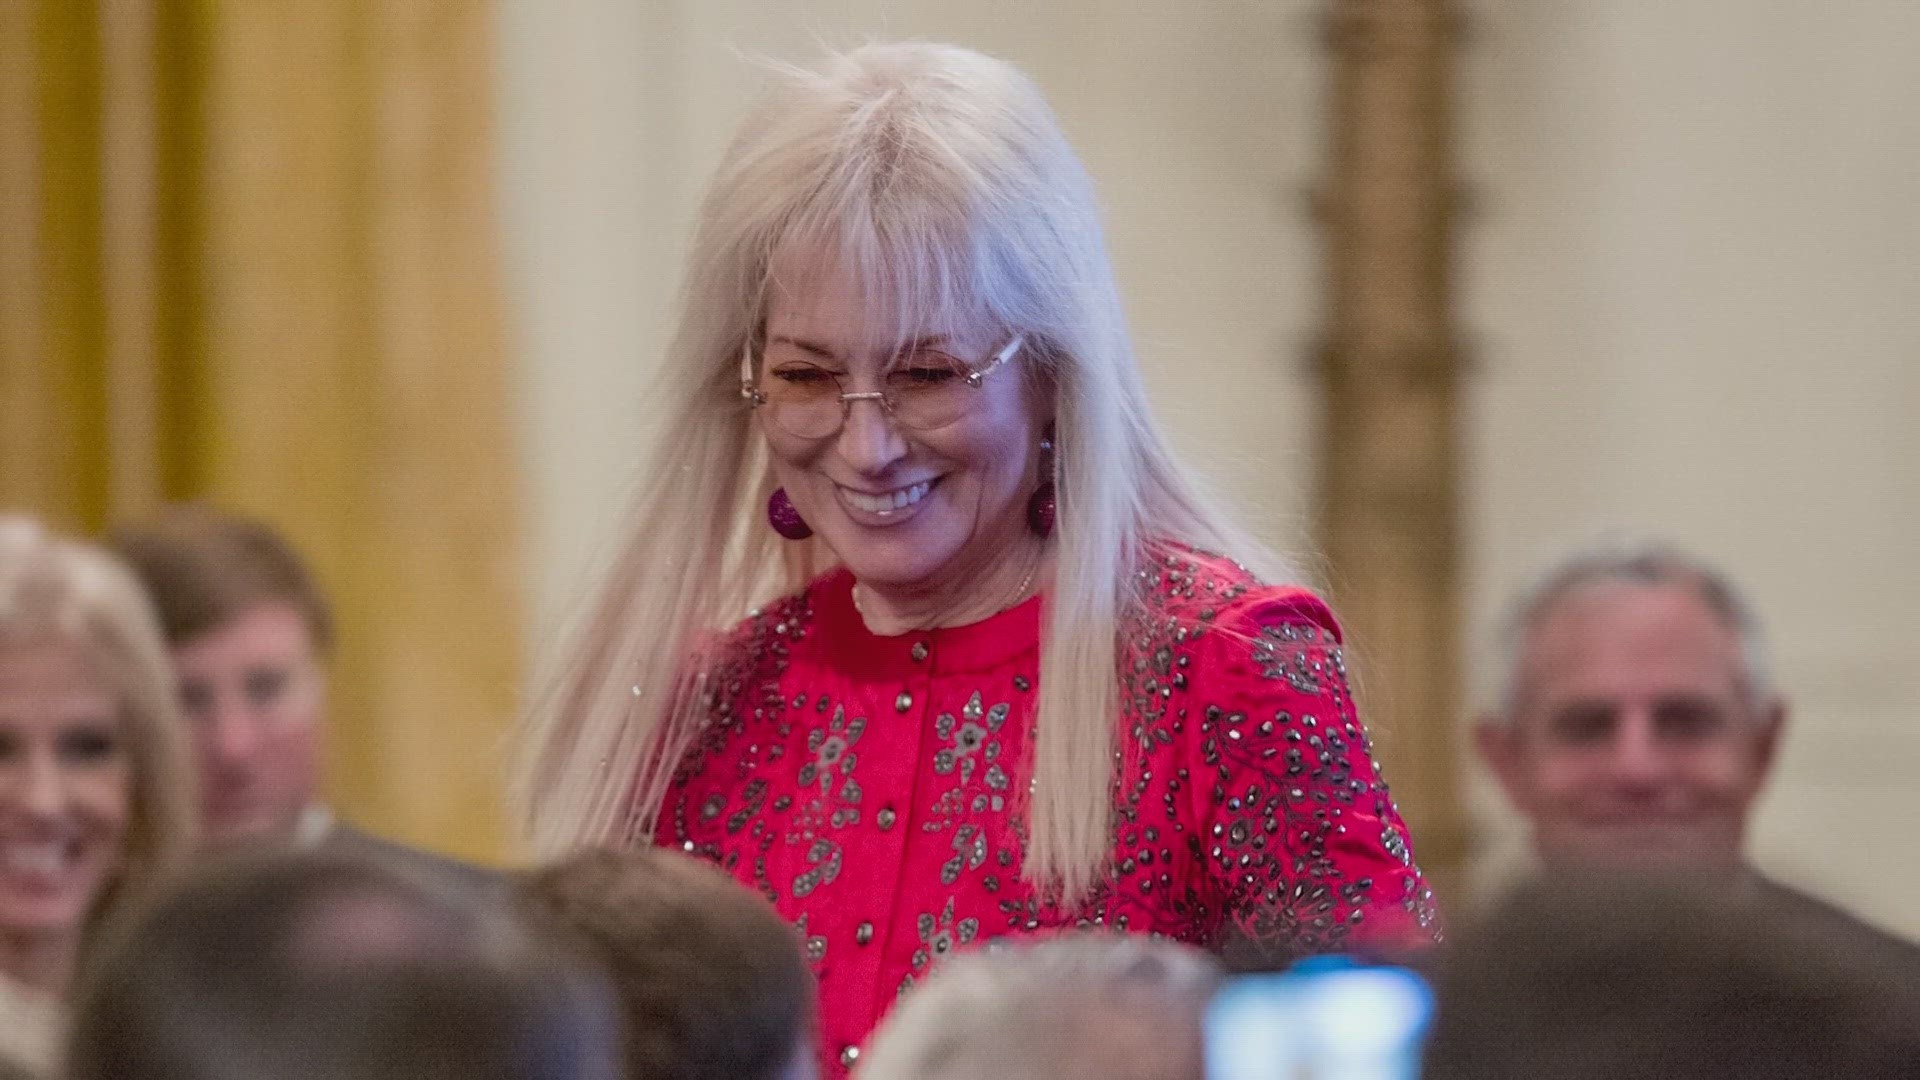 Who is Miriam Adelson, the likely future majority owner of the Dallas Mavericks?